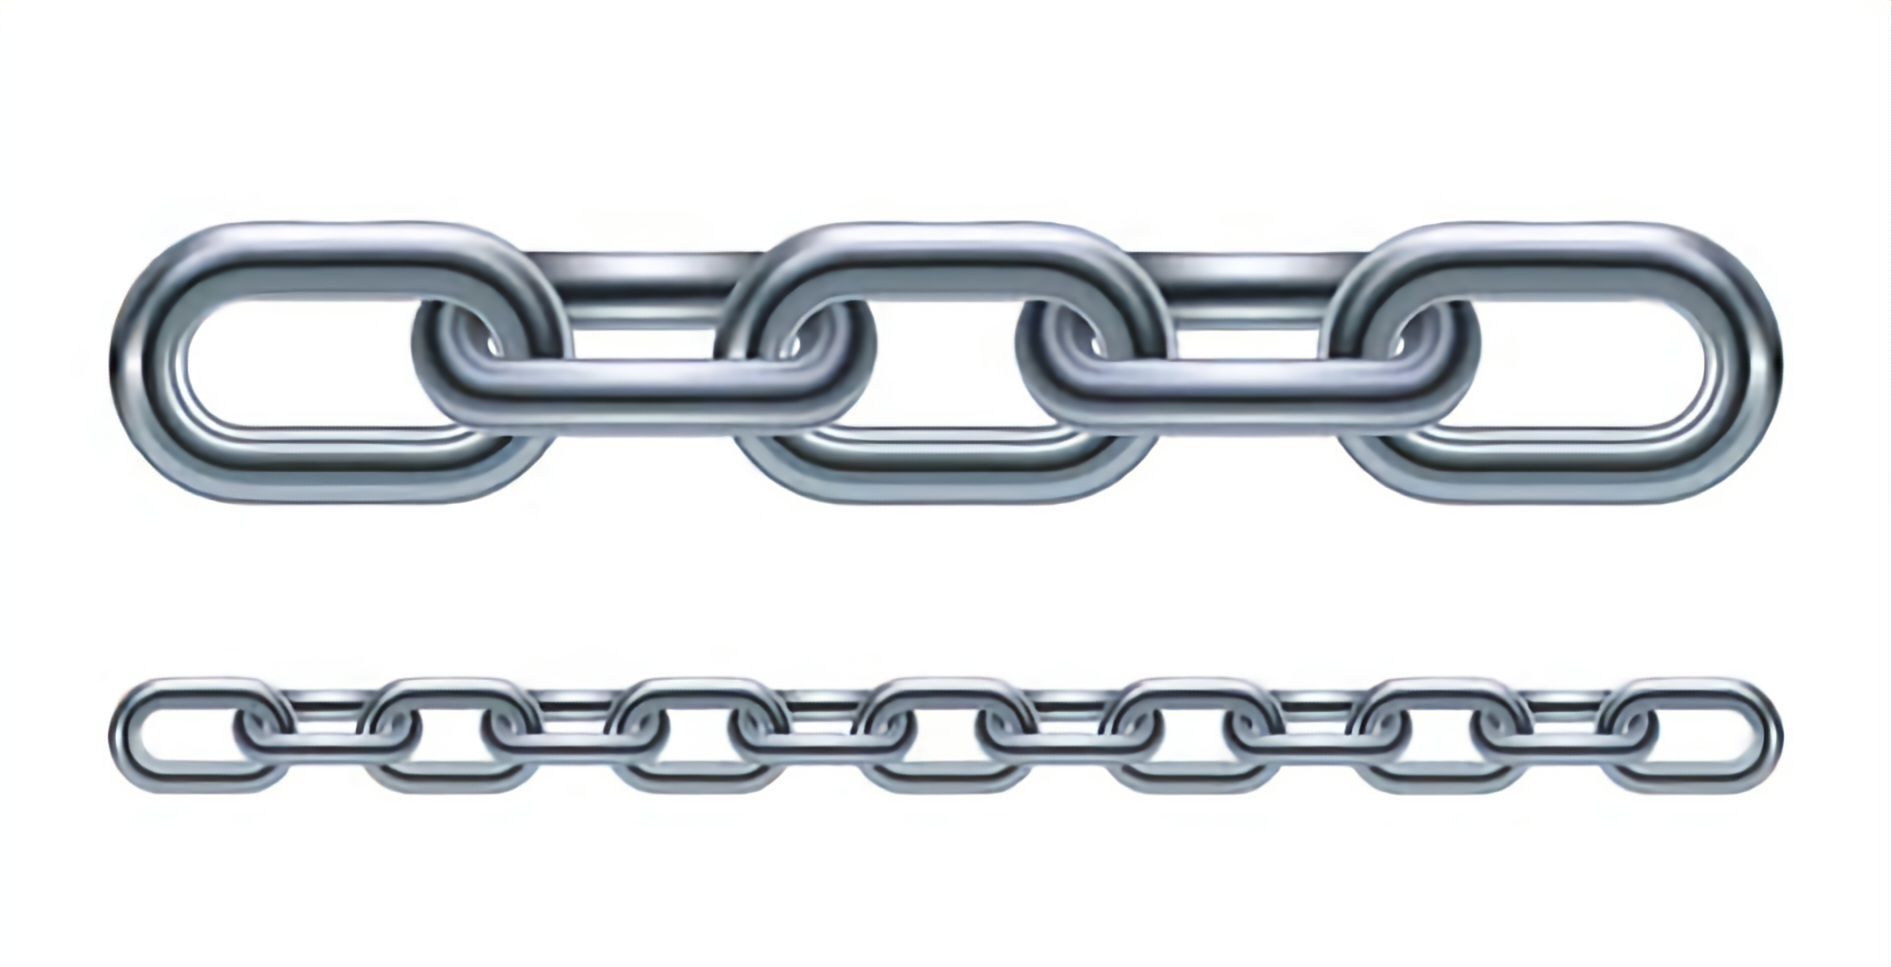 Link Chain ss